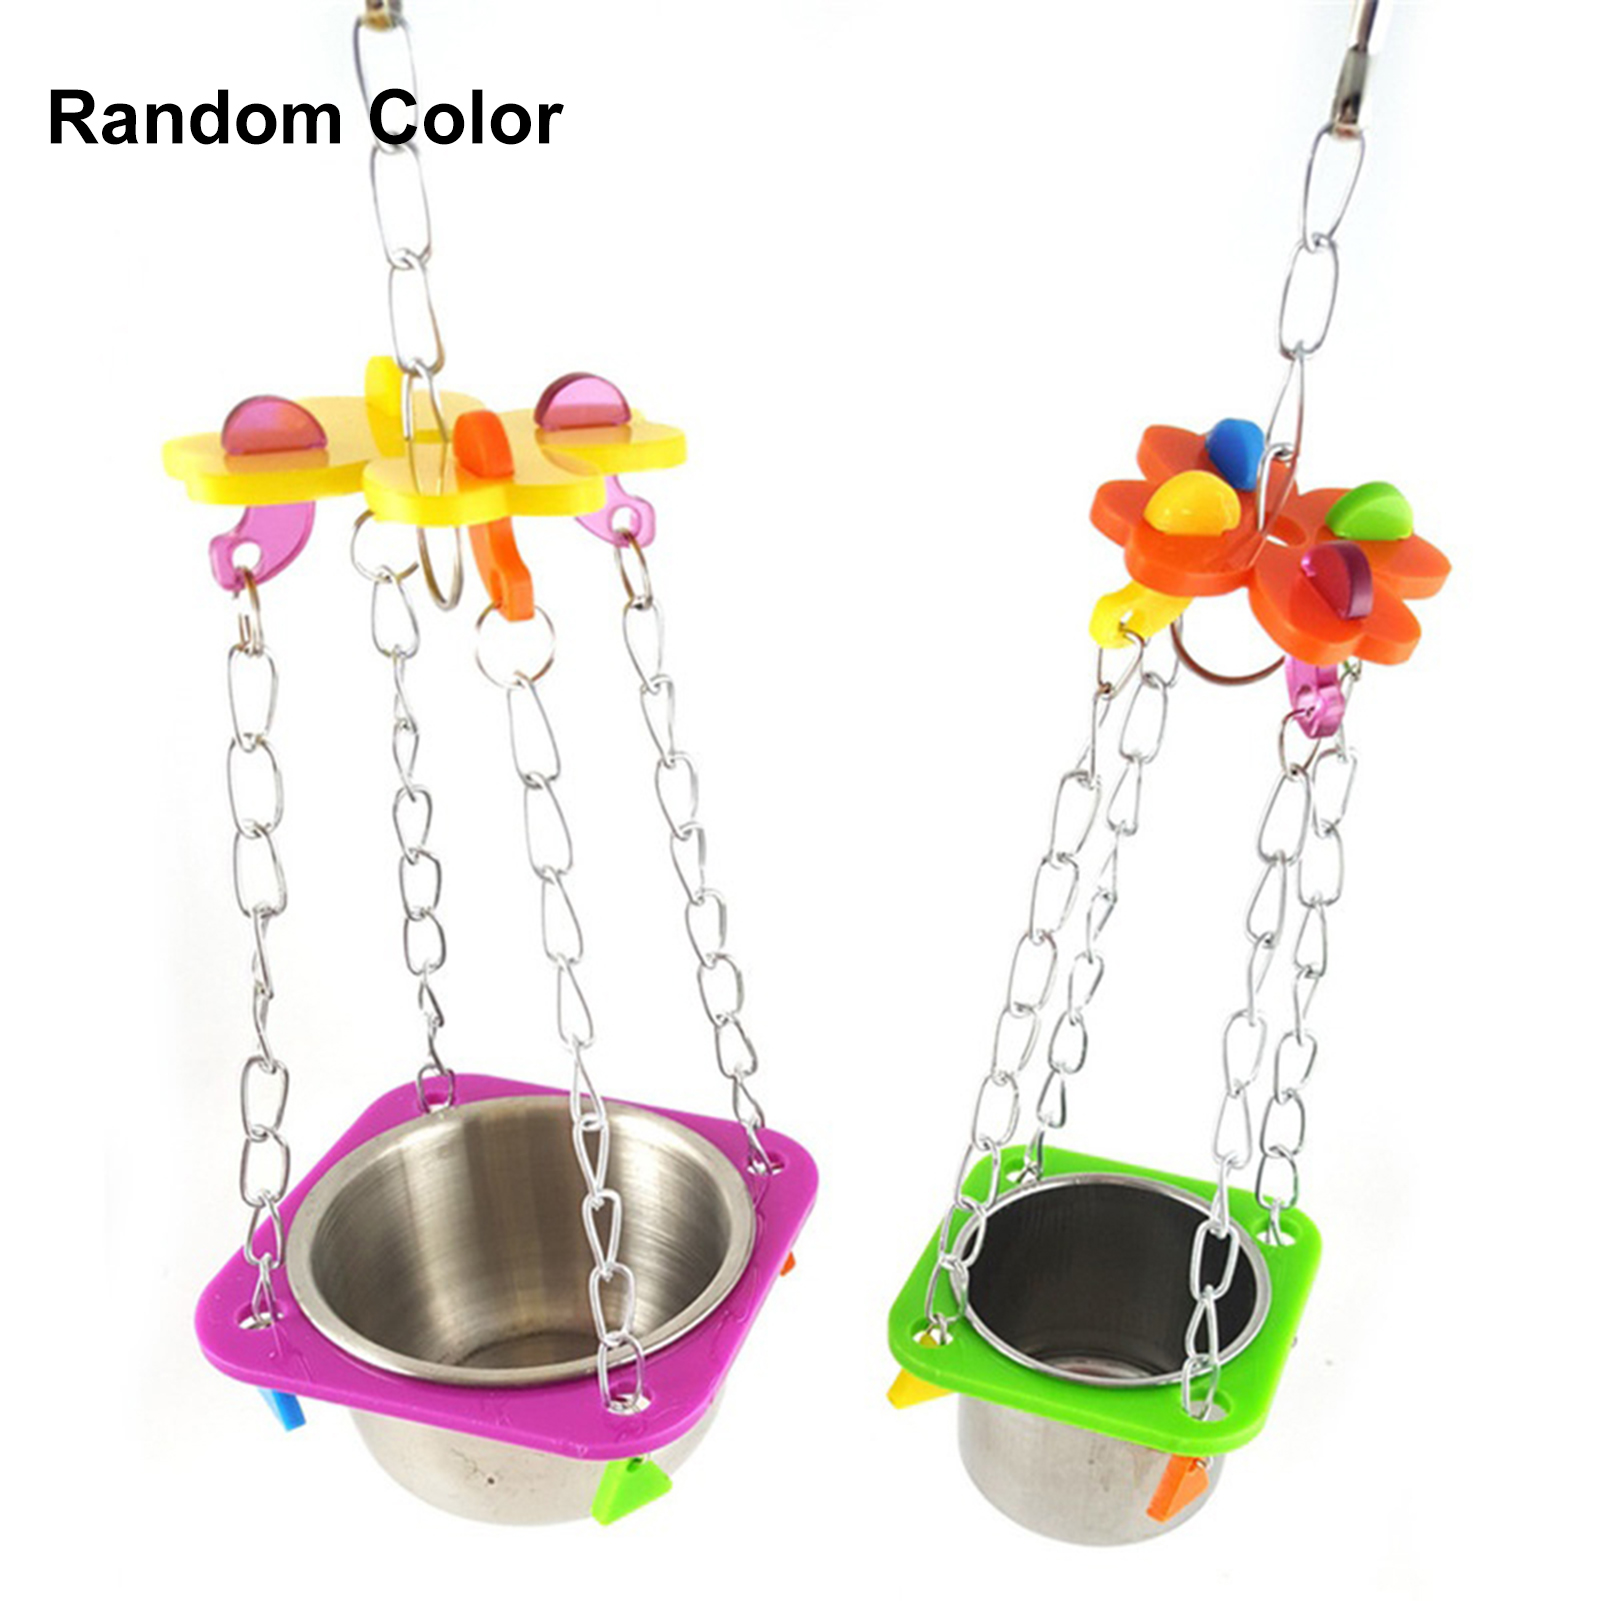 Fashion Parrot Food/Water Bowl with Hanging Swing Toys